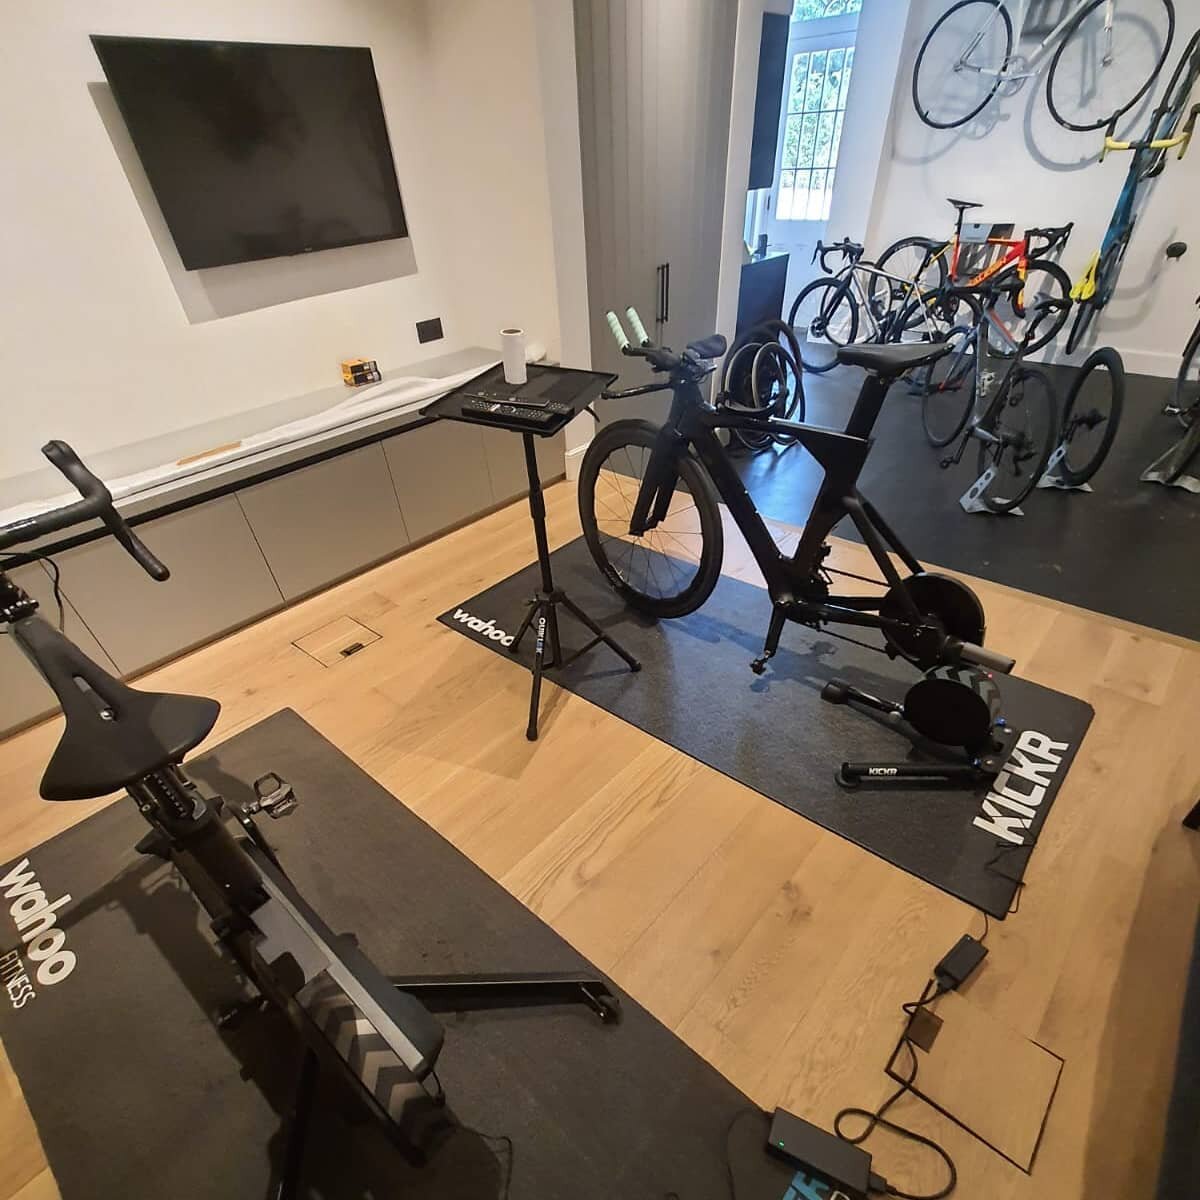 Care to take a spin? 

What a beautiful gym area complete with our stunning plank wood floor 😍

Completed project by Huscroft Flooring 

#realwoodflooring 
#plankwoodflooring 
#woodfloors 
#woodflooringexperts 
#flooringideas 
#gymfloor 
#interiorde